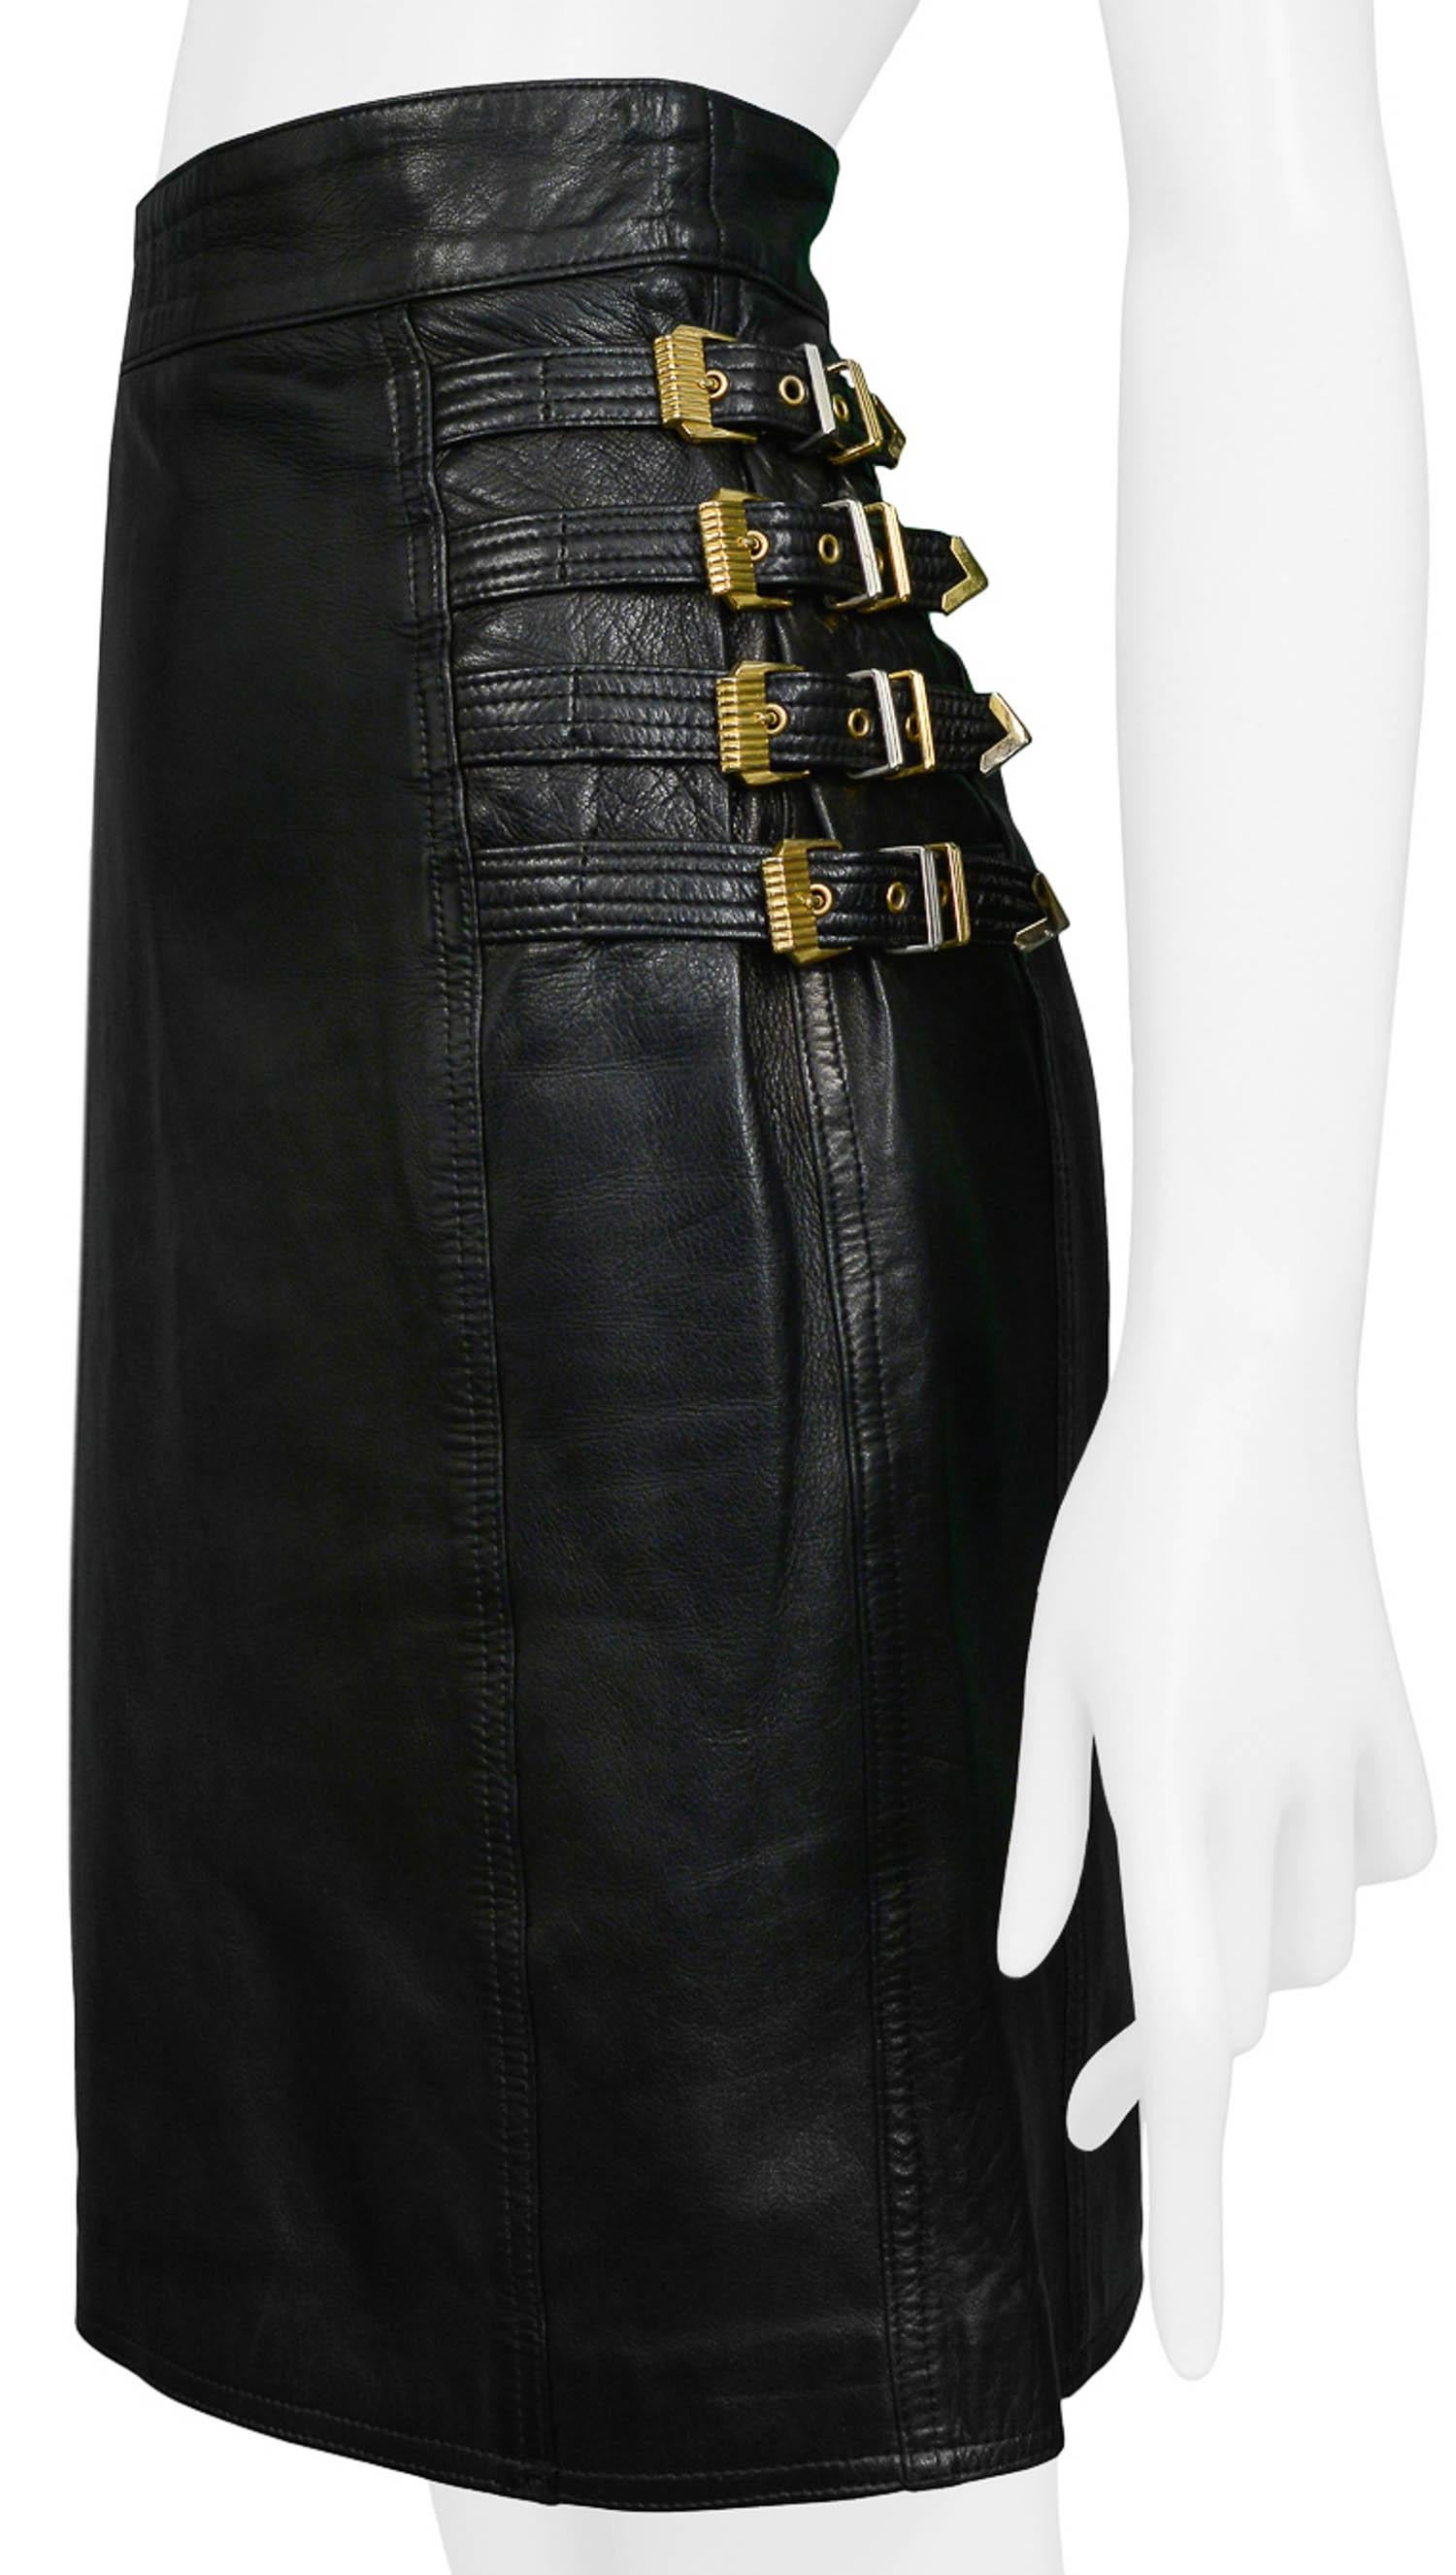 Vintage Gianni Versace black leather bondage fitted skirt with gold and silver tone buckles at hips. From the Autumn/Winter 1992 Collection. 

Excellent Condition.

Size: 42